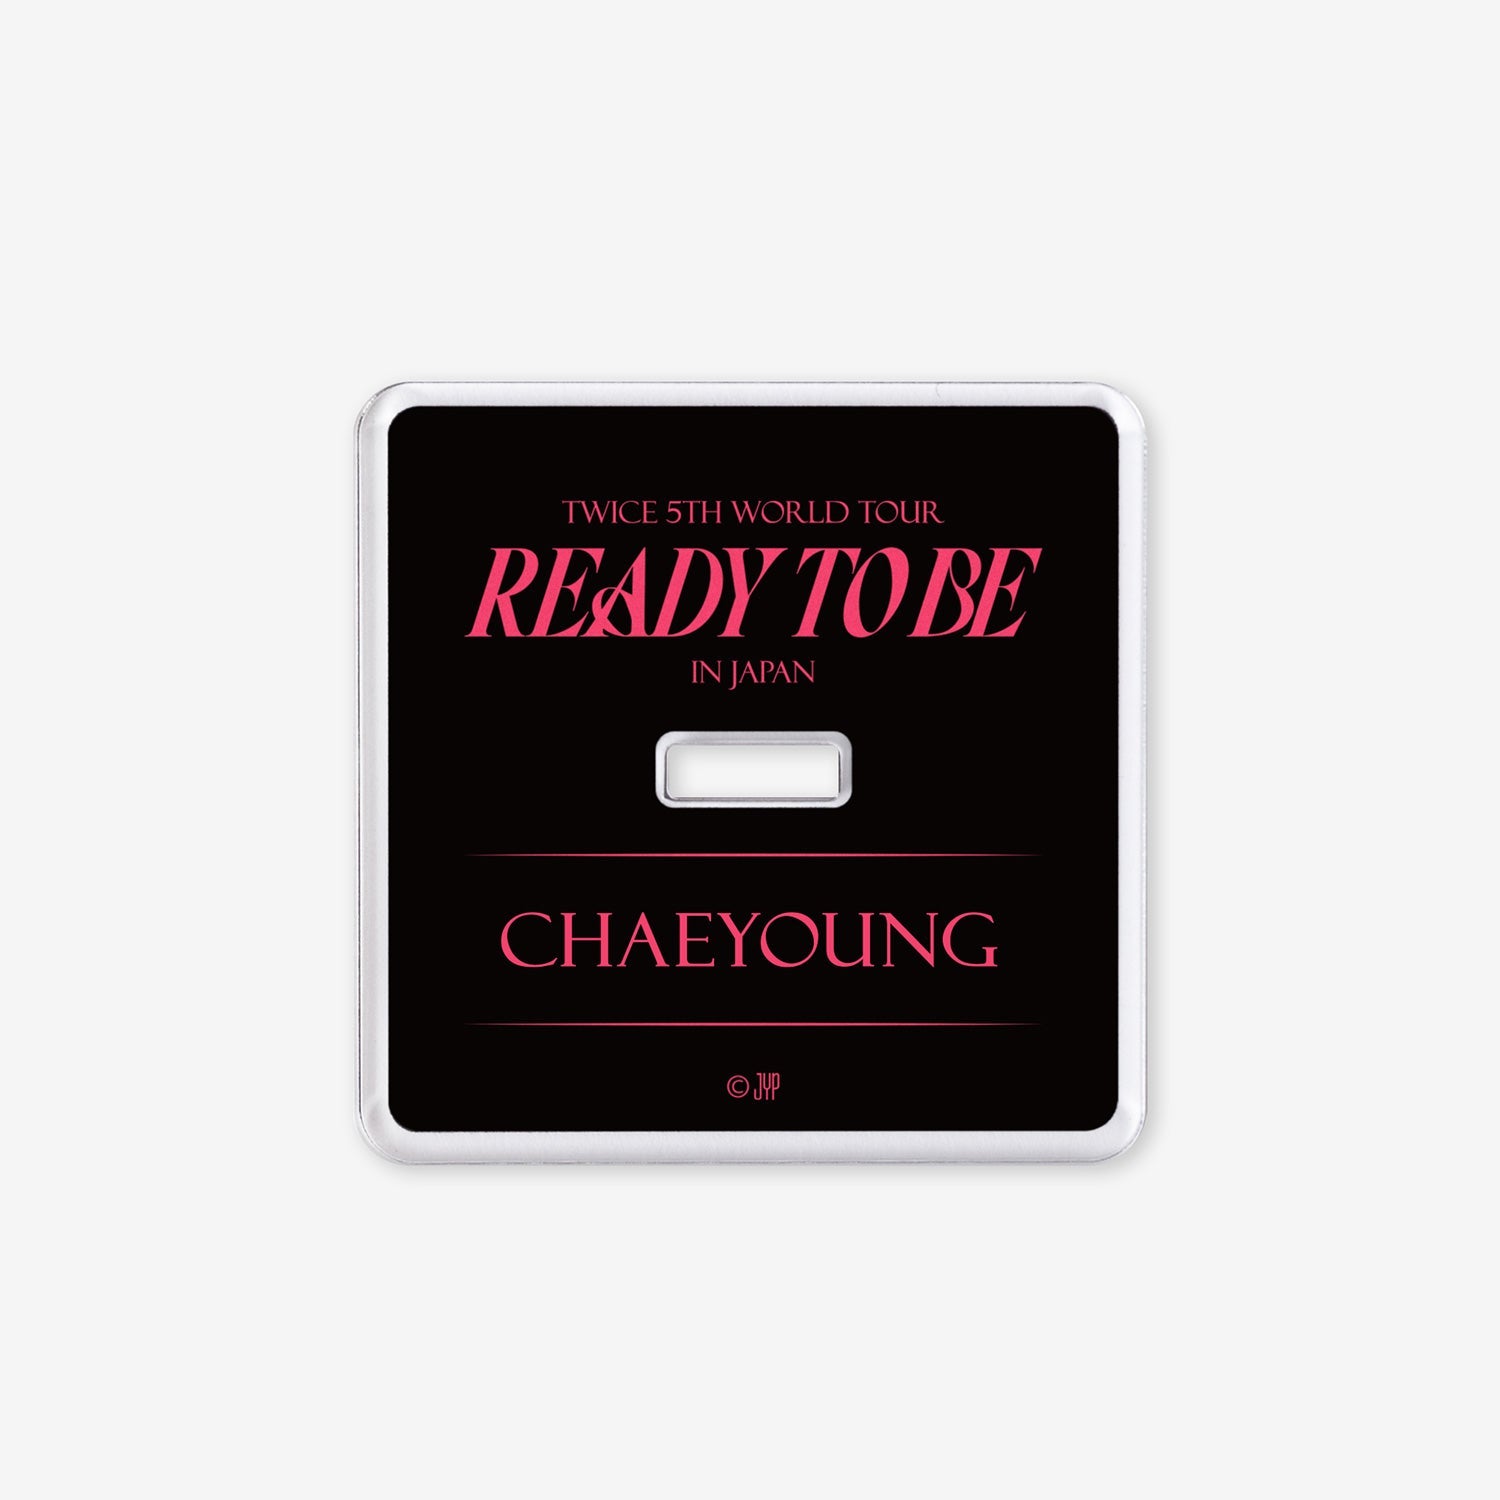 ACRYLIC STAND - CHAEYOUNG【DOME】/ TWICE『READY TO BE』